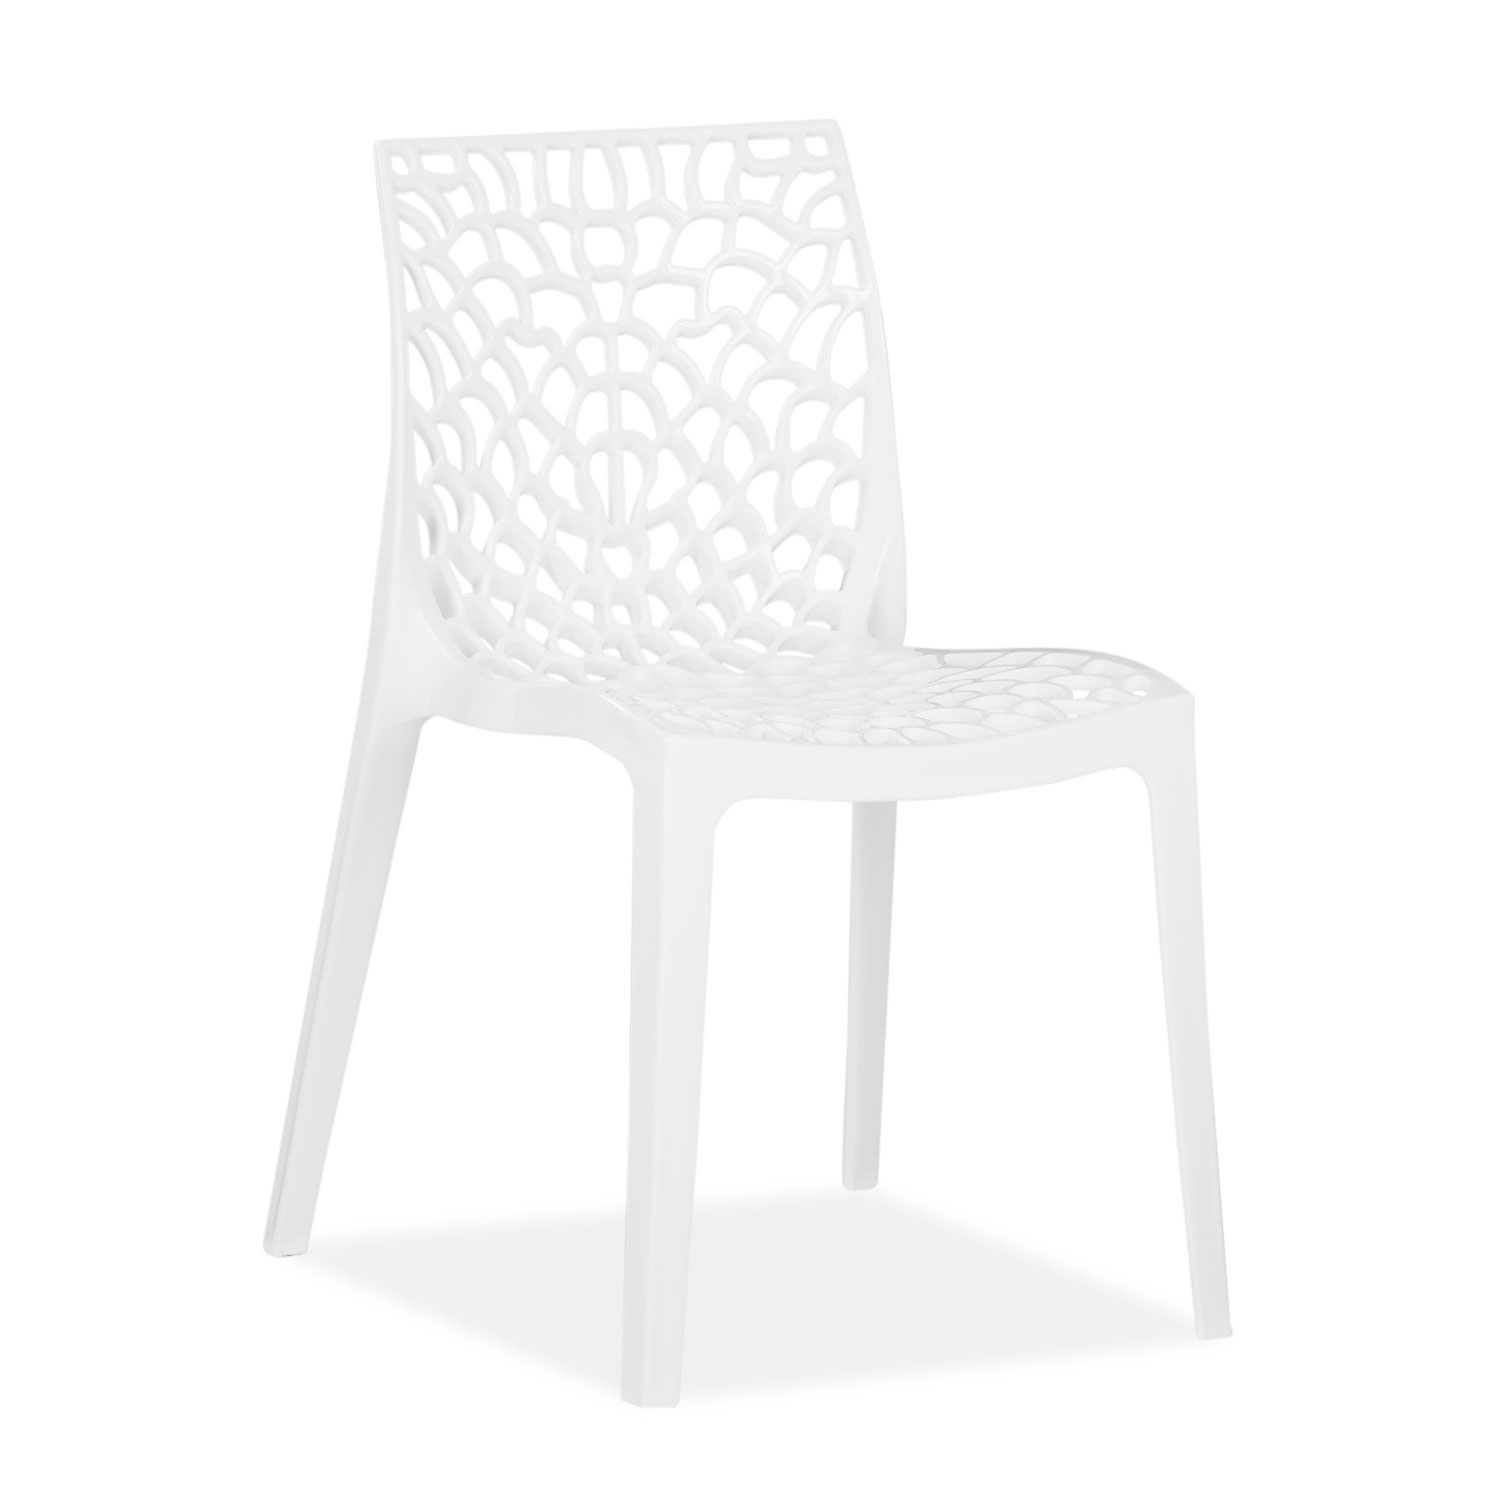 Design Garden chair Set of 2, 4, 6 White Modern Camping chairs Outdoor chairs Plastic Stacking chairs